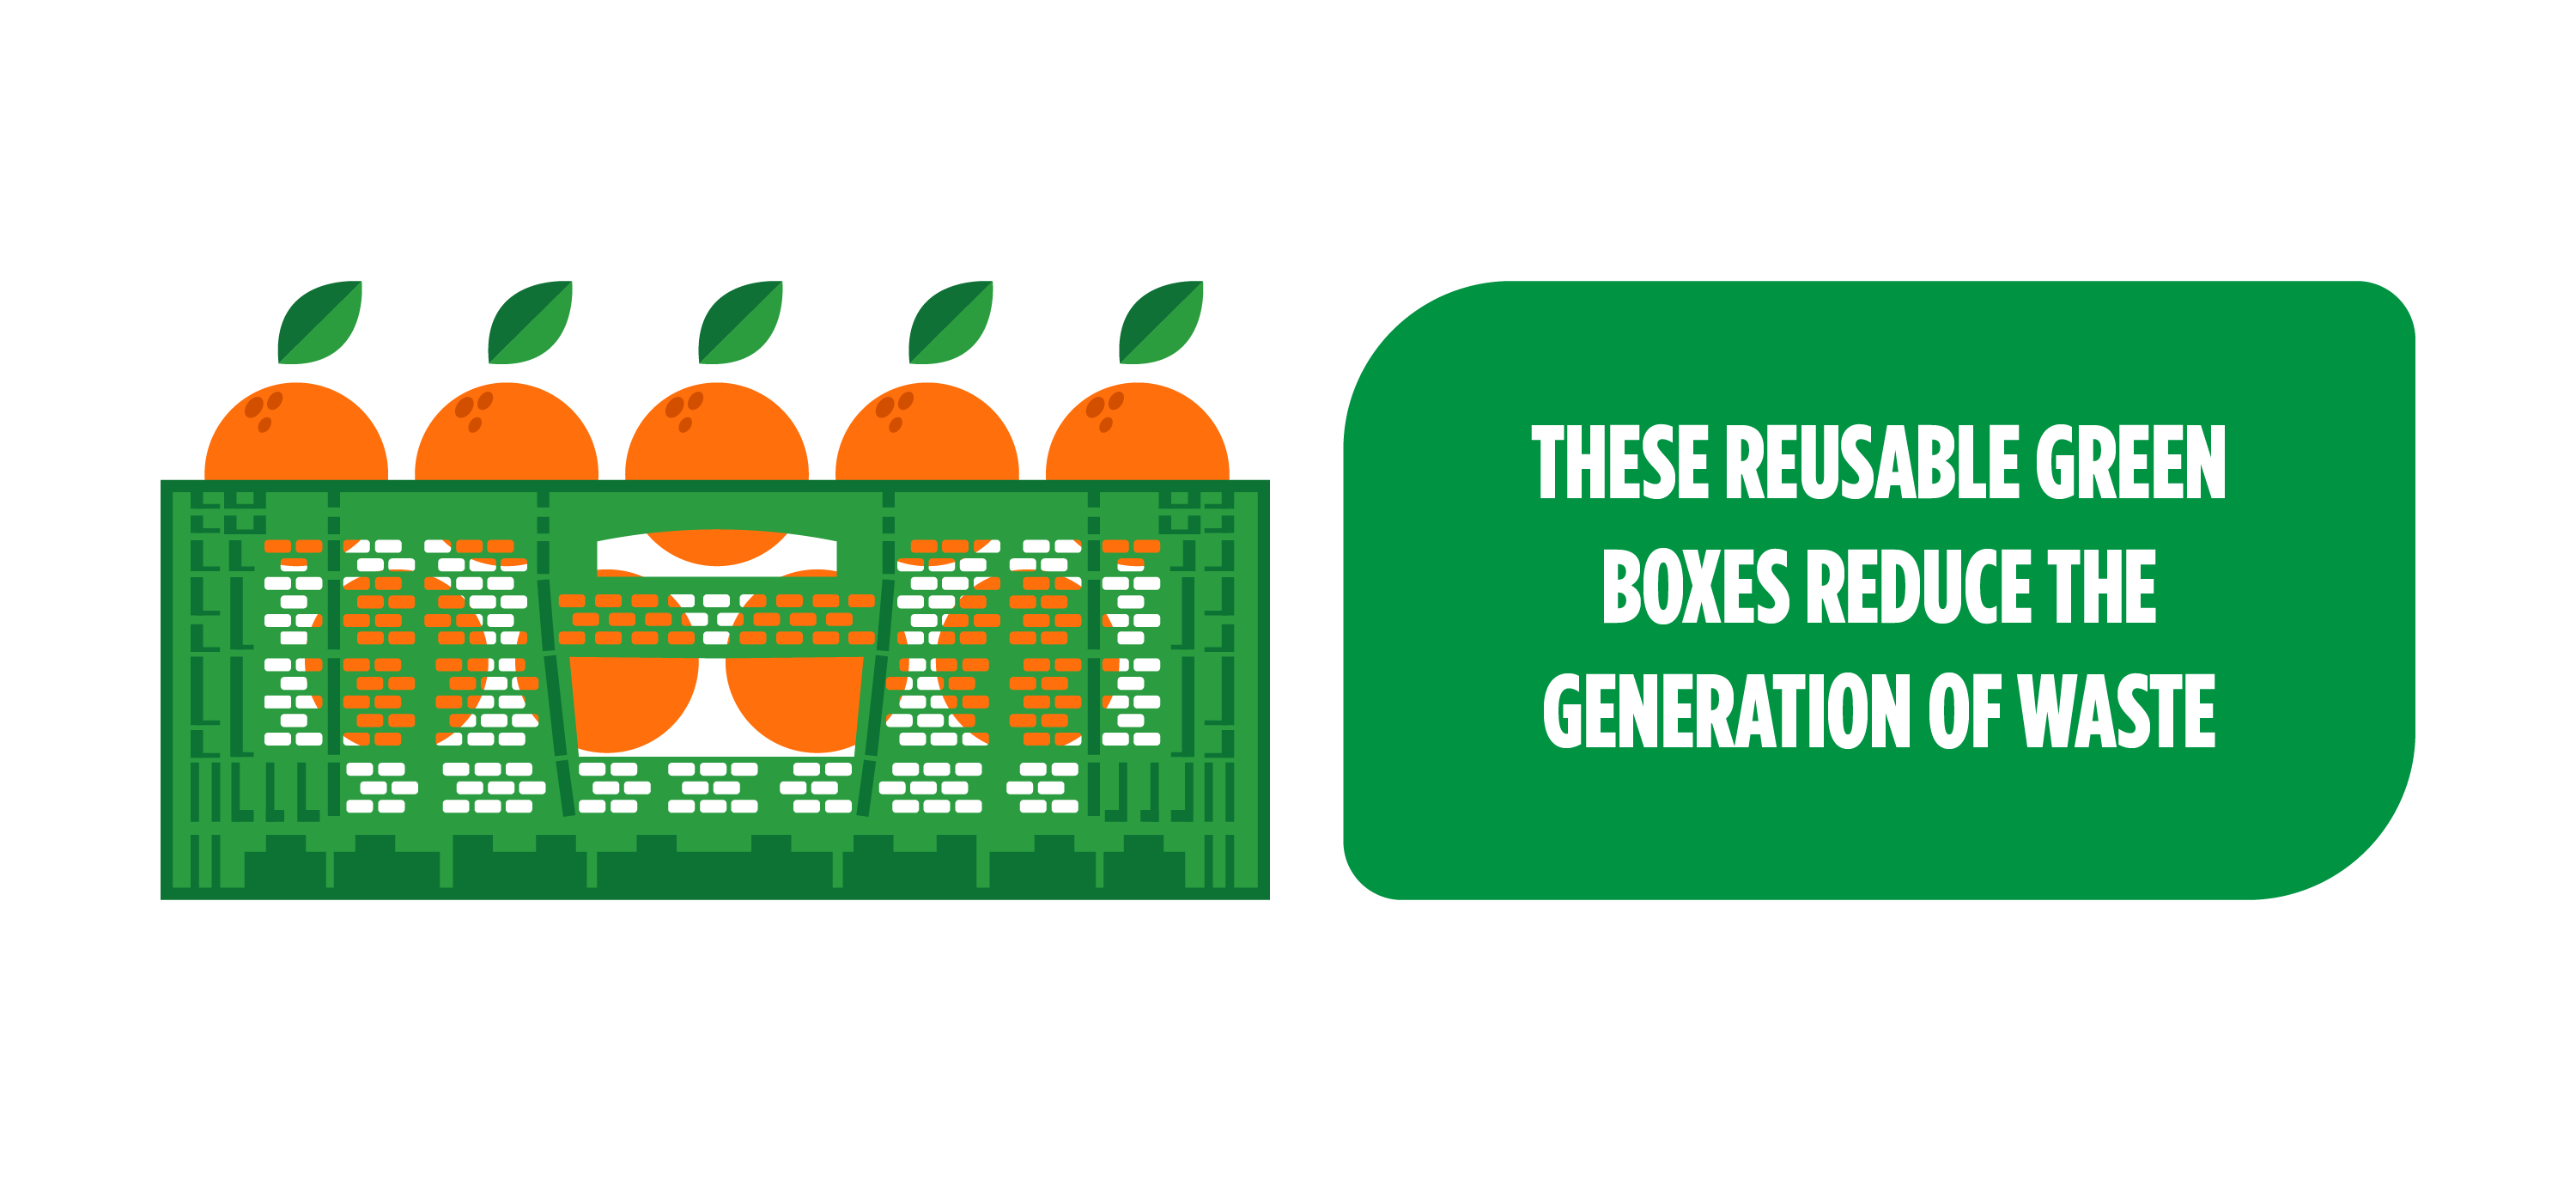 Reusable green crates reduce the generation of waste